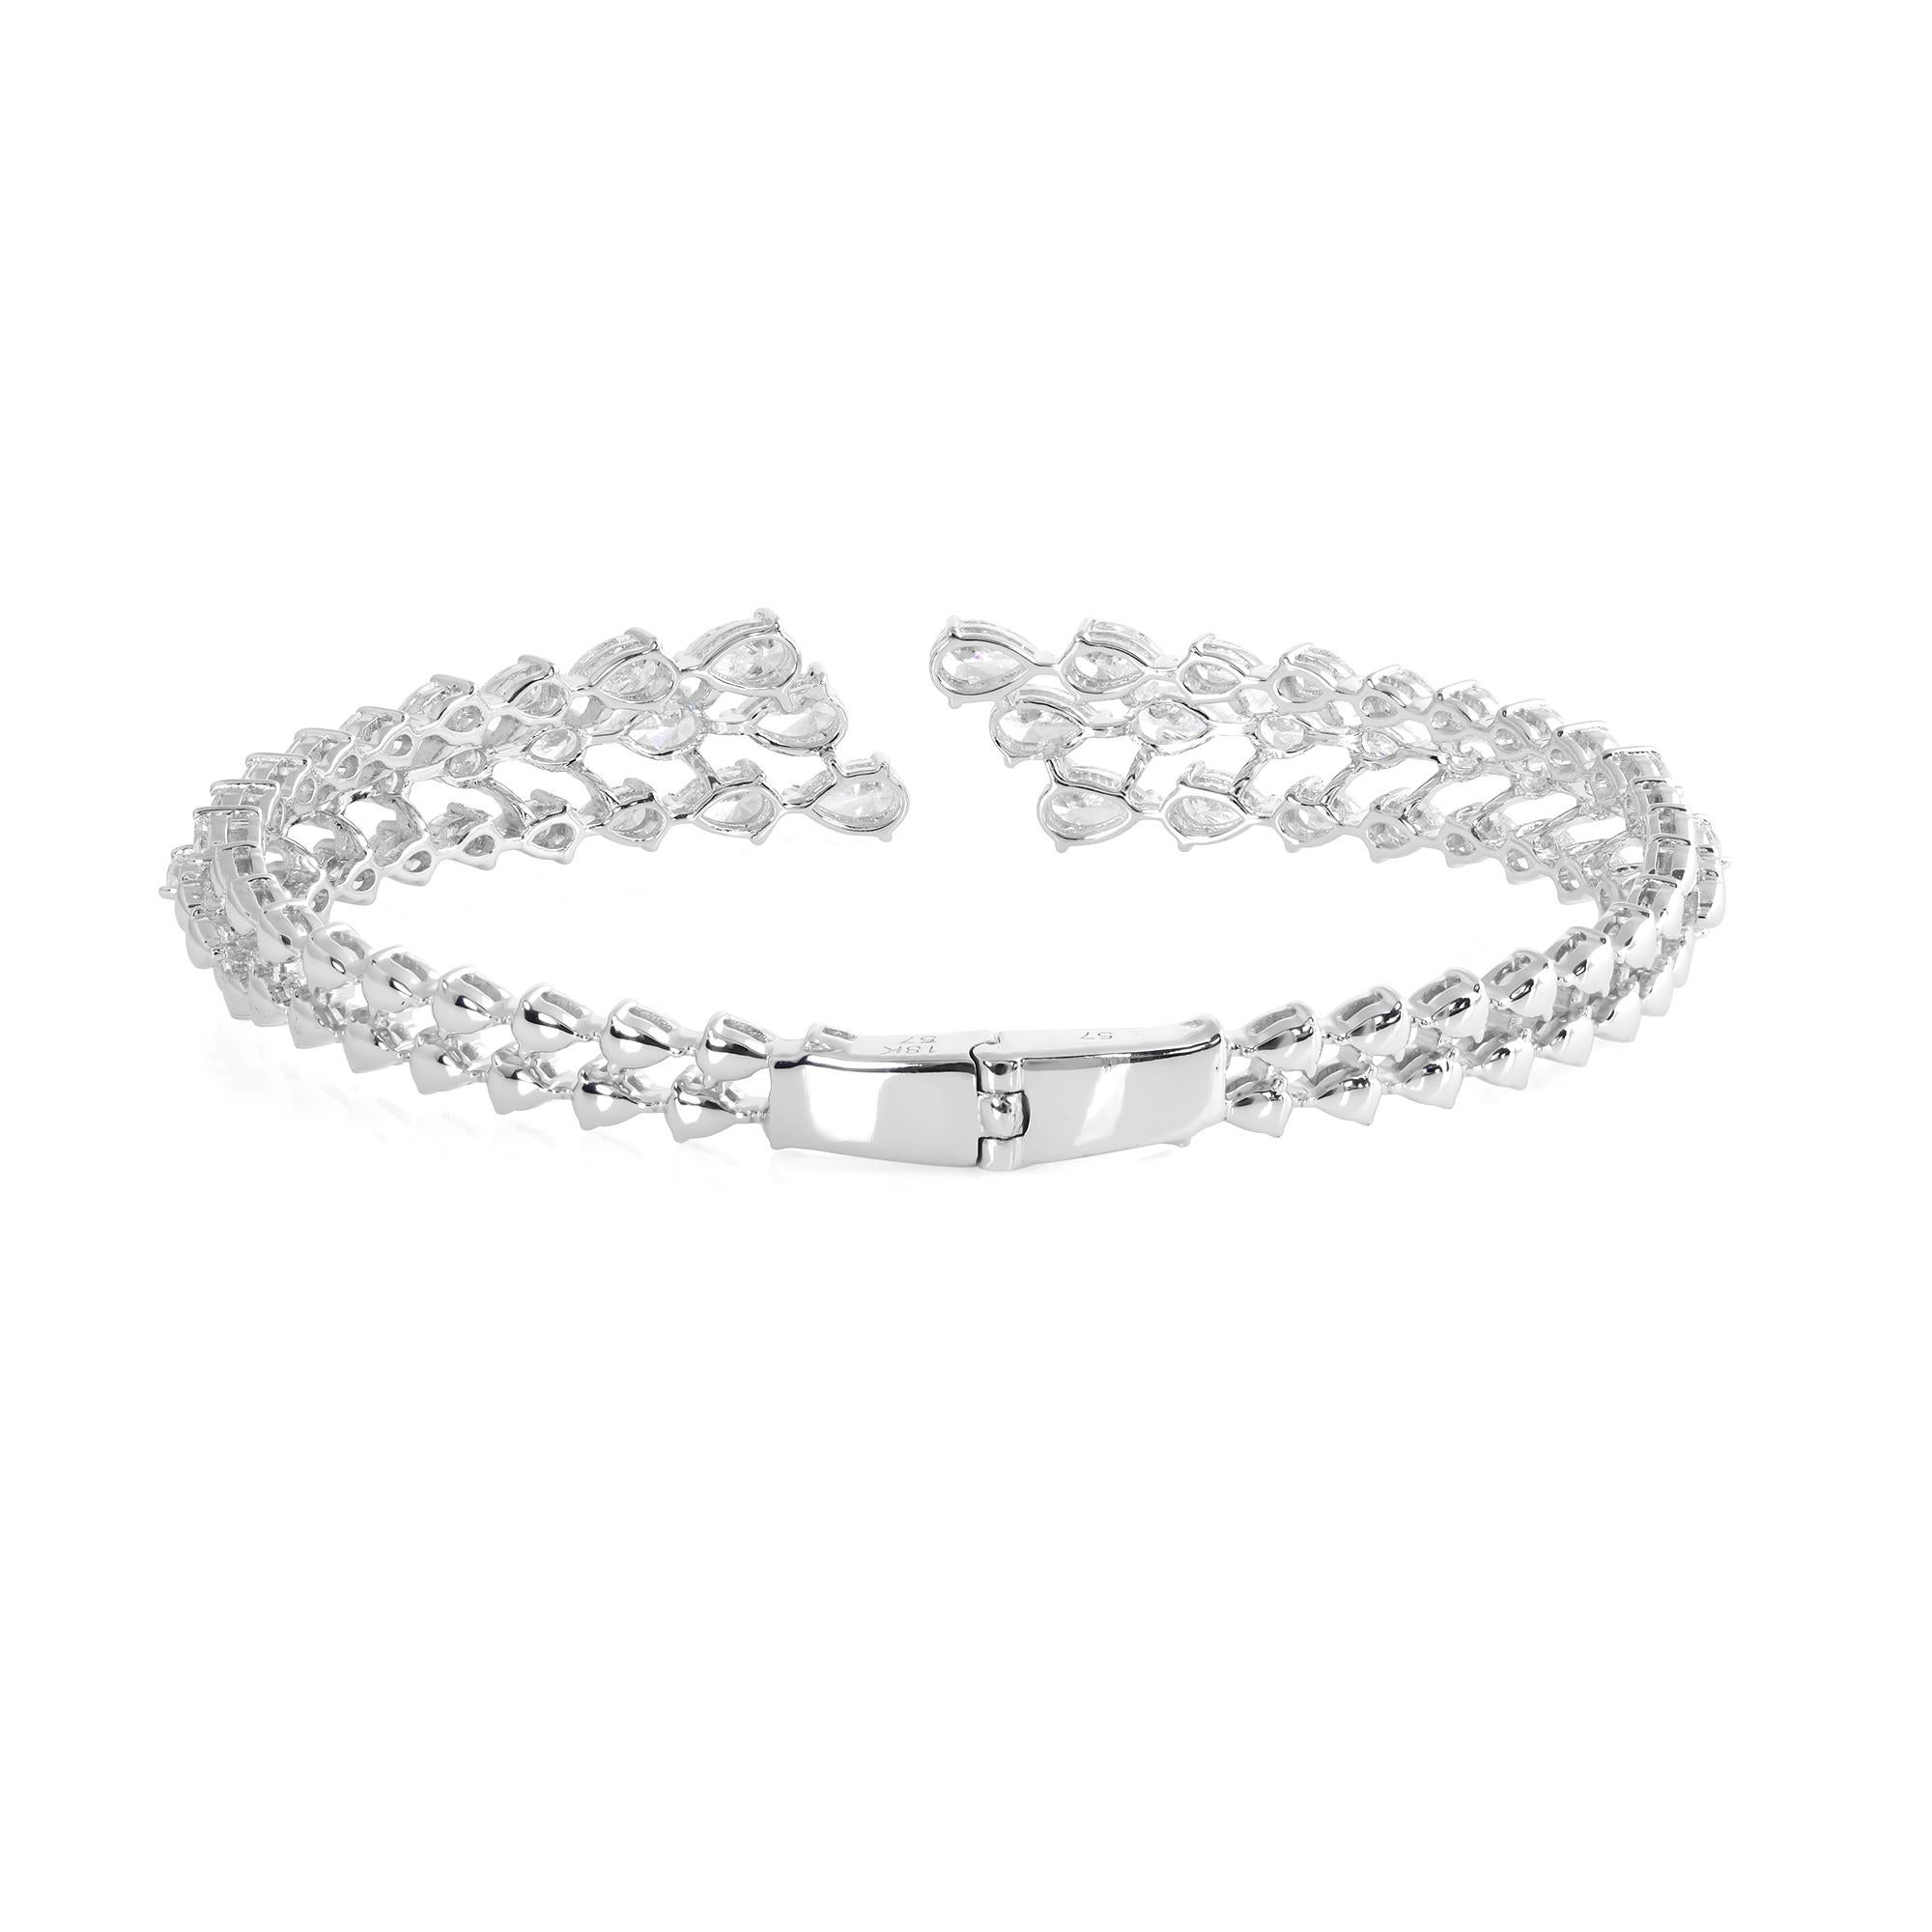 Experience the pinnacle of luxury and glamour with this mesmerizing Natural 4.55 Carat Pear Diamond Cuff Bangle Bracelet, crafted in radiant 18 karat white gold. This exquisite piece of jewelry epitomizes sophistication, showcasing the unparalleled